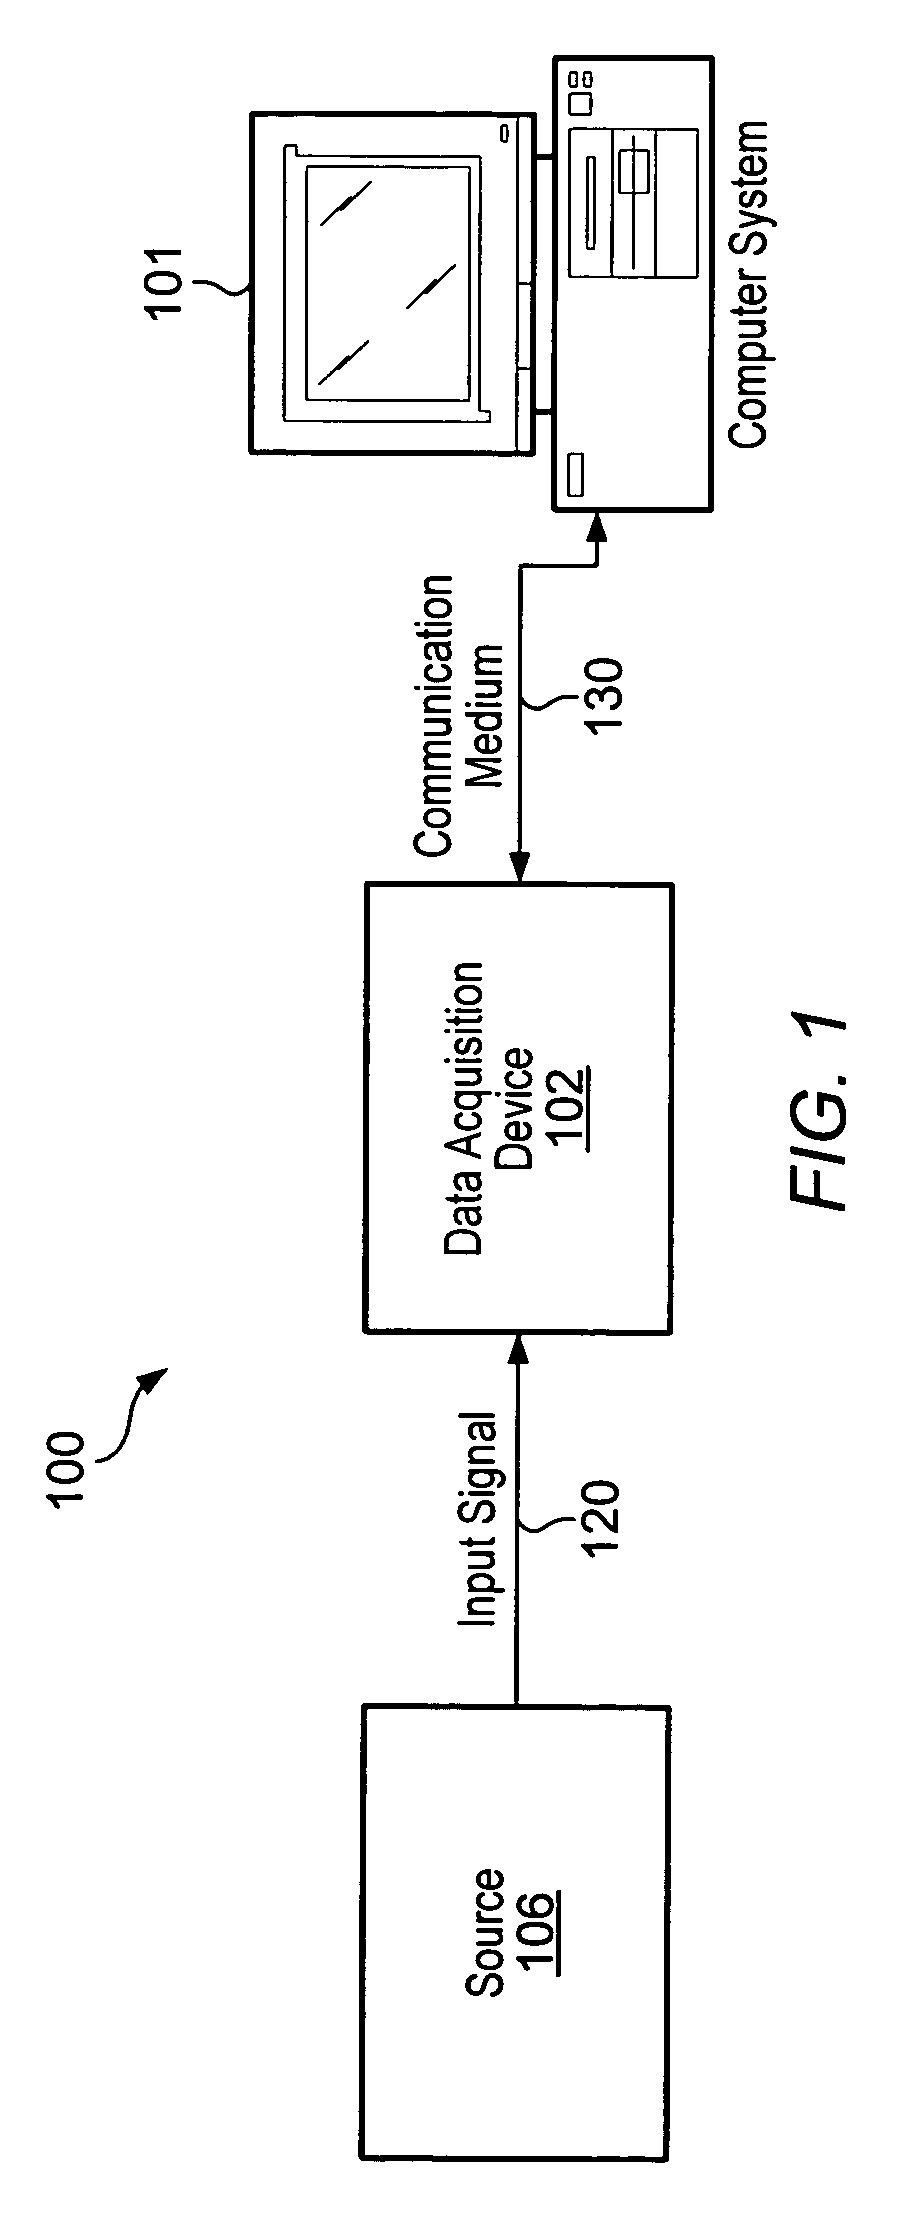 Programmable gain instrumentation amplifier including a composite amplifier for level shifting and improved signal-to-noise ratio